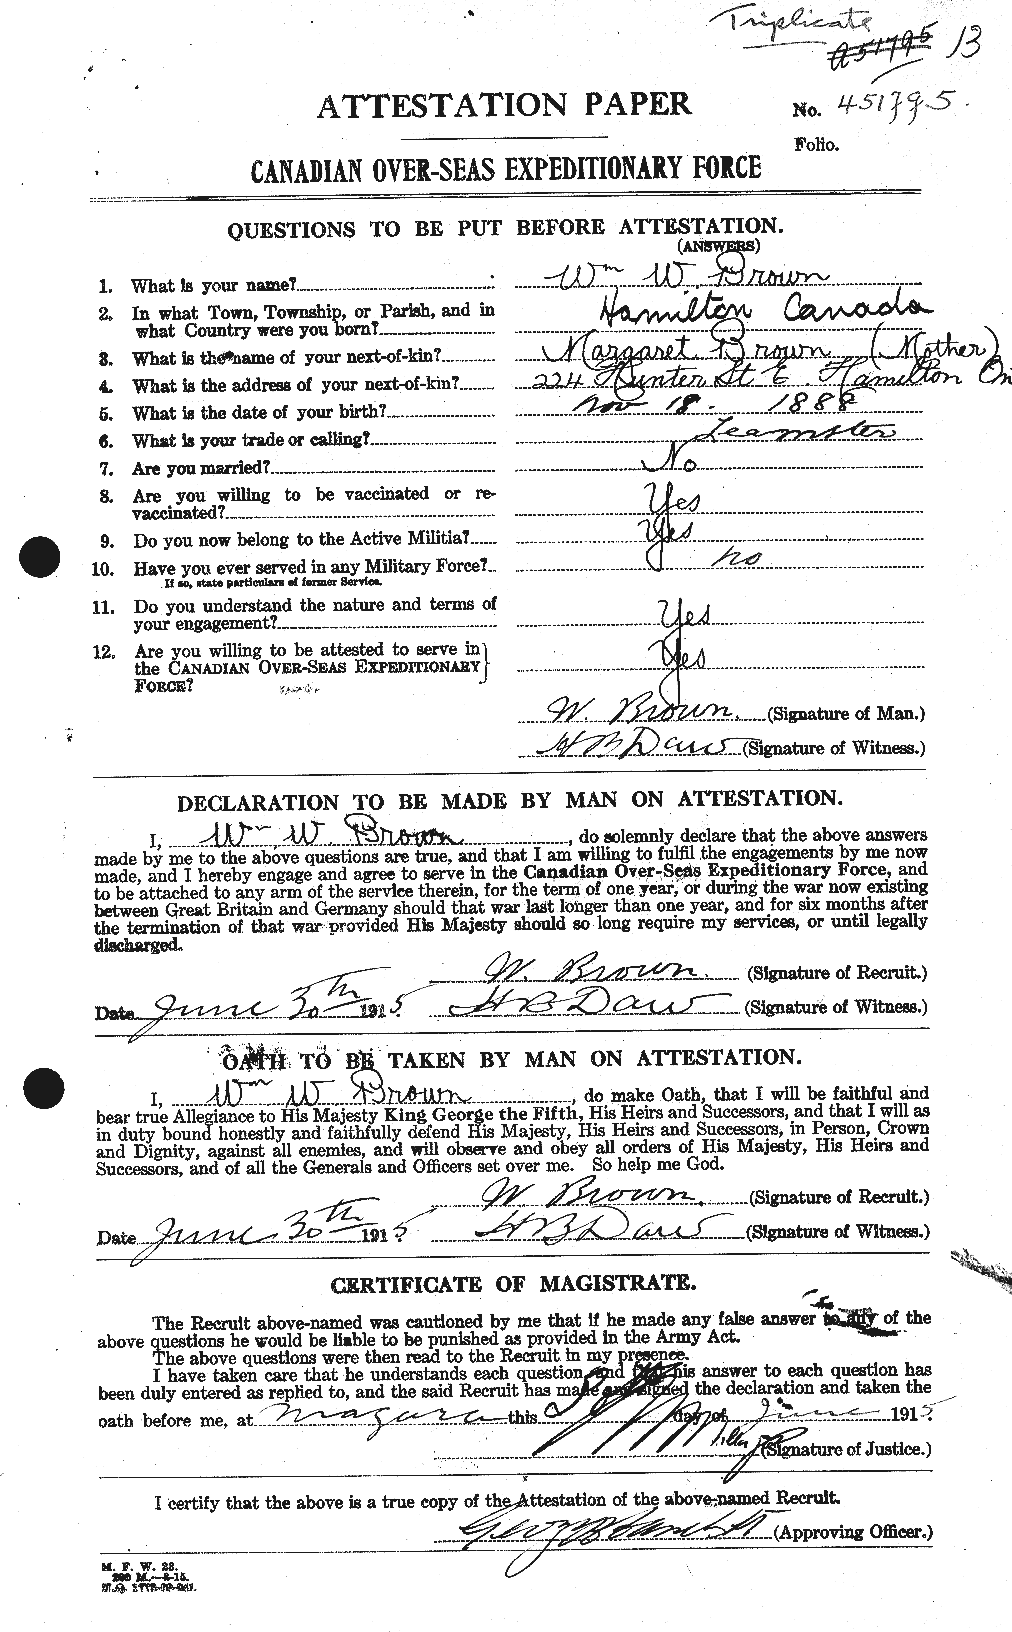 Personnel Records of the First World War - CEF 270895a